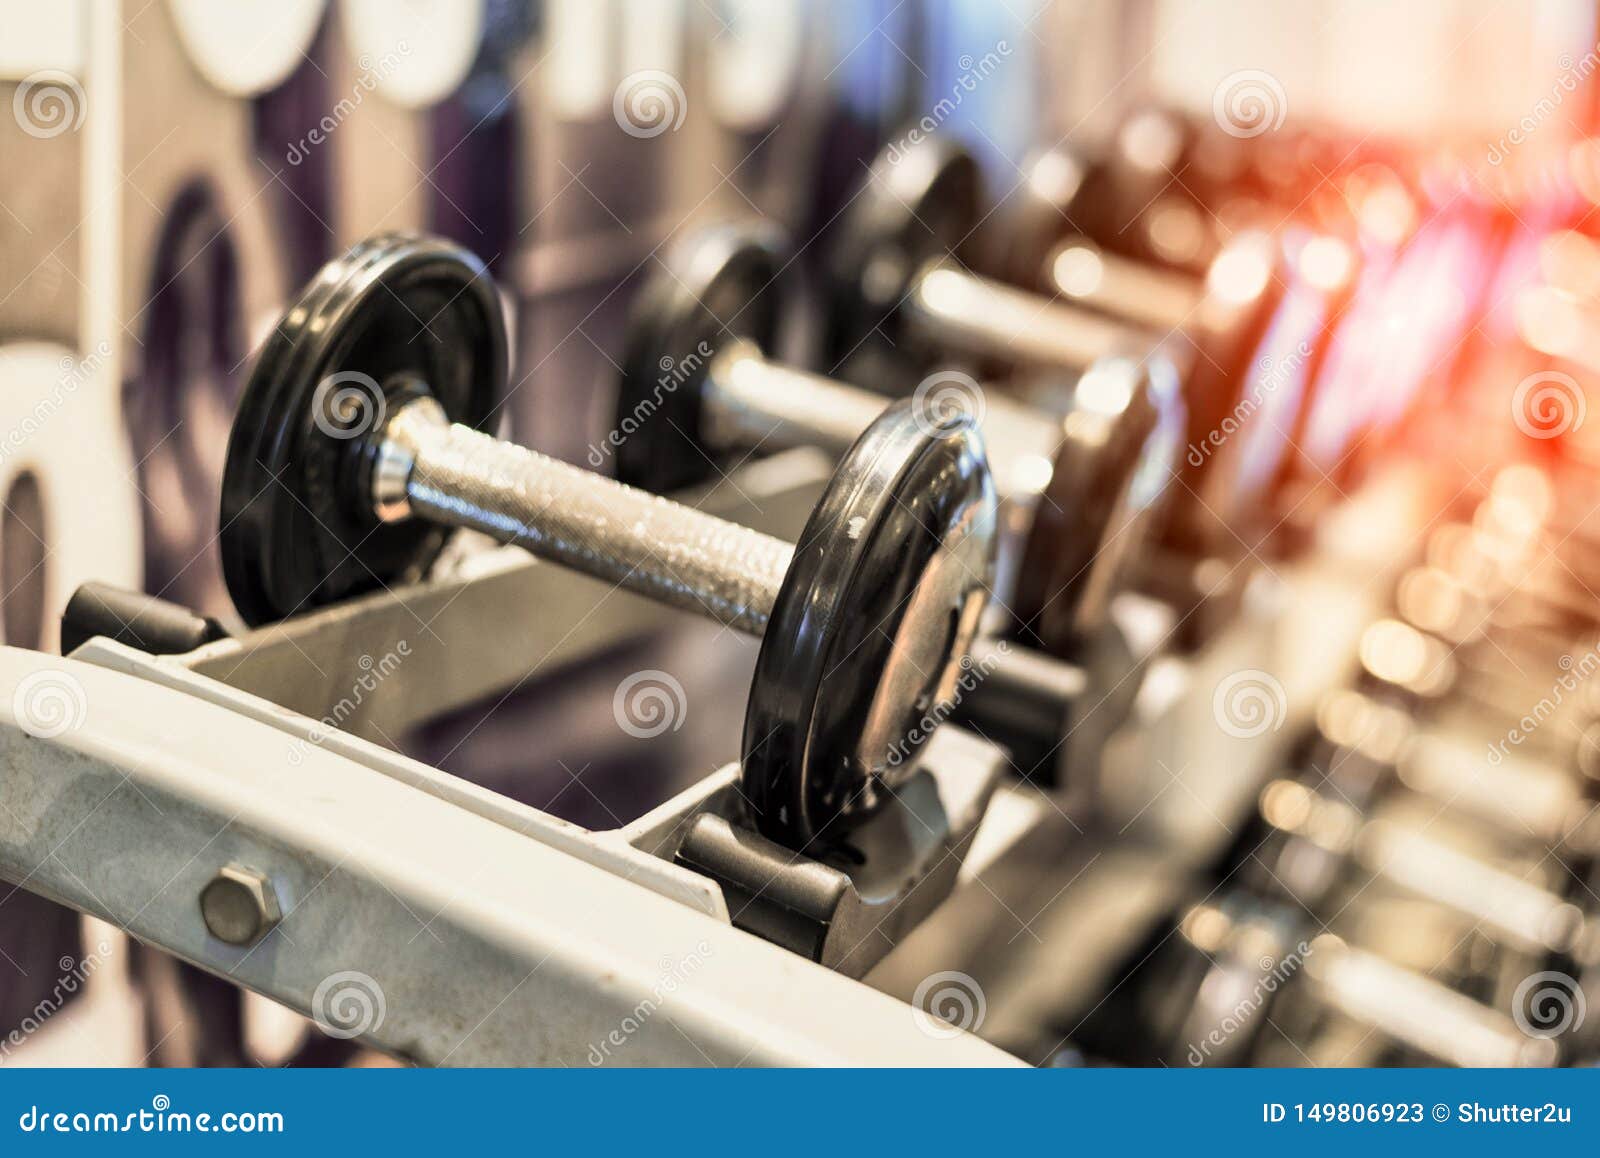 Gym Shelf Stock Photos and Pictures - 3,404 Images